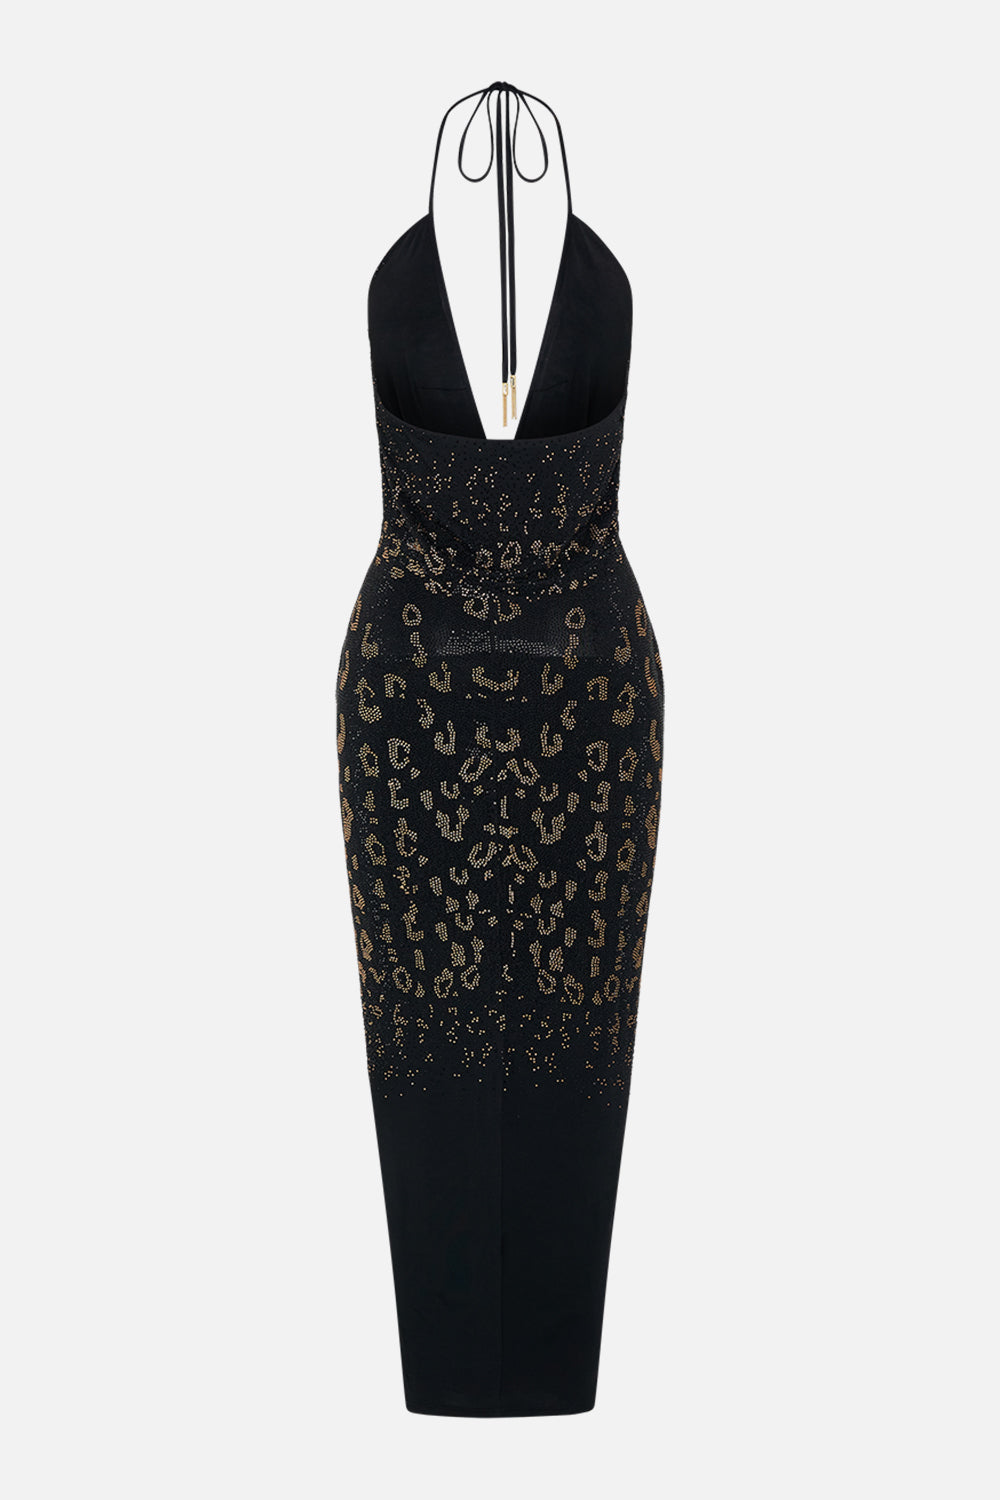 Back product view of CAMILLA black jersey dress in Mosaic Muse  